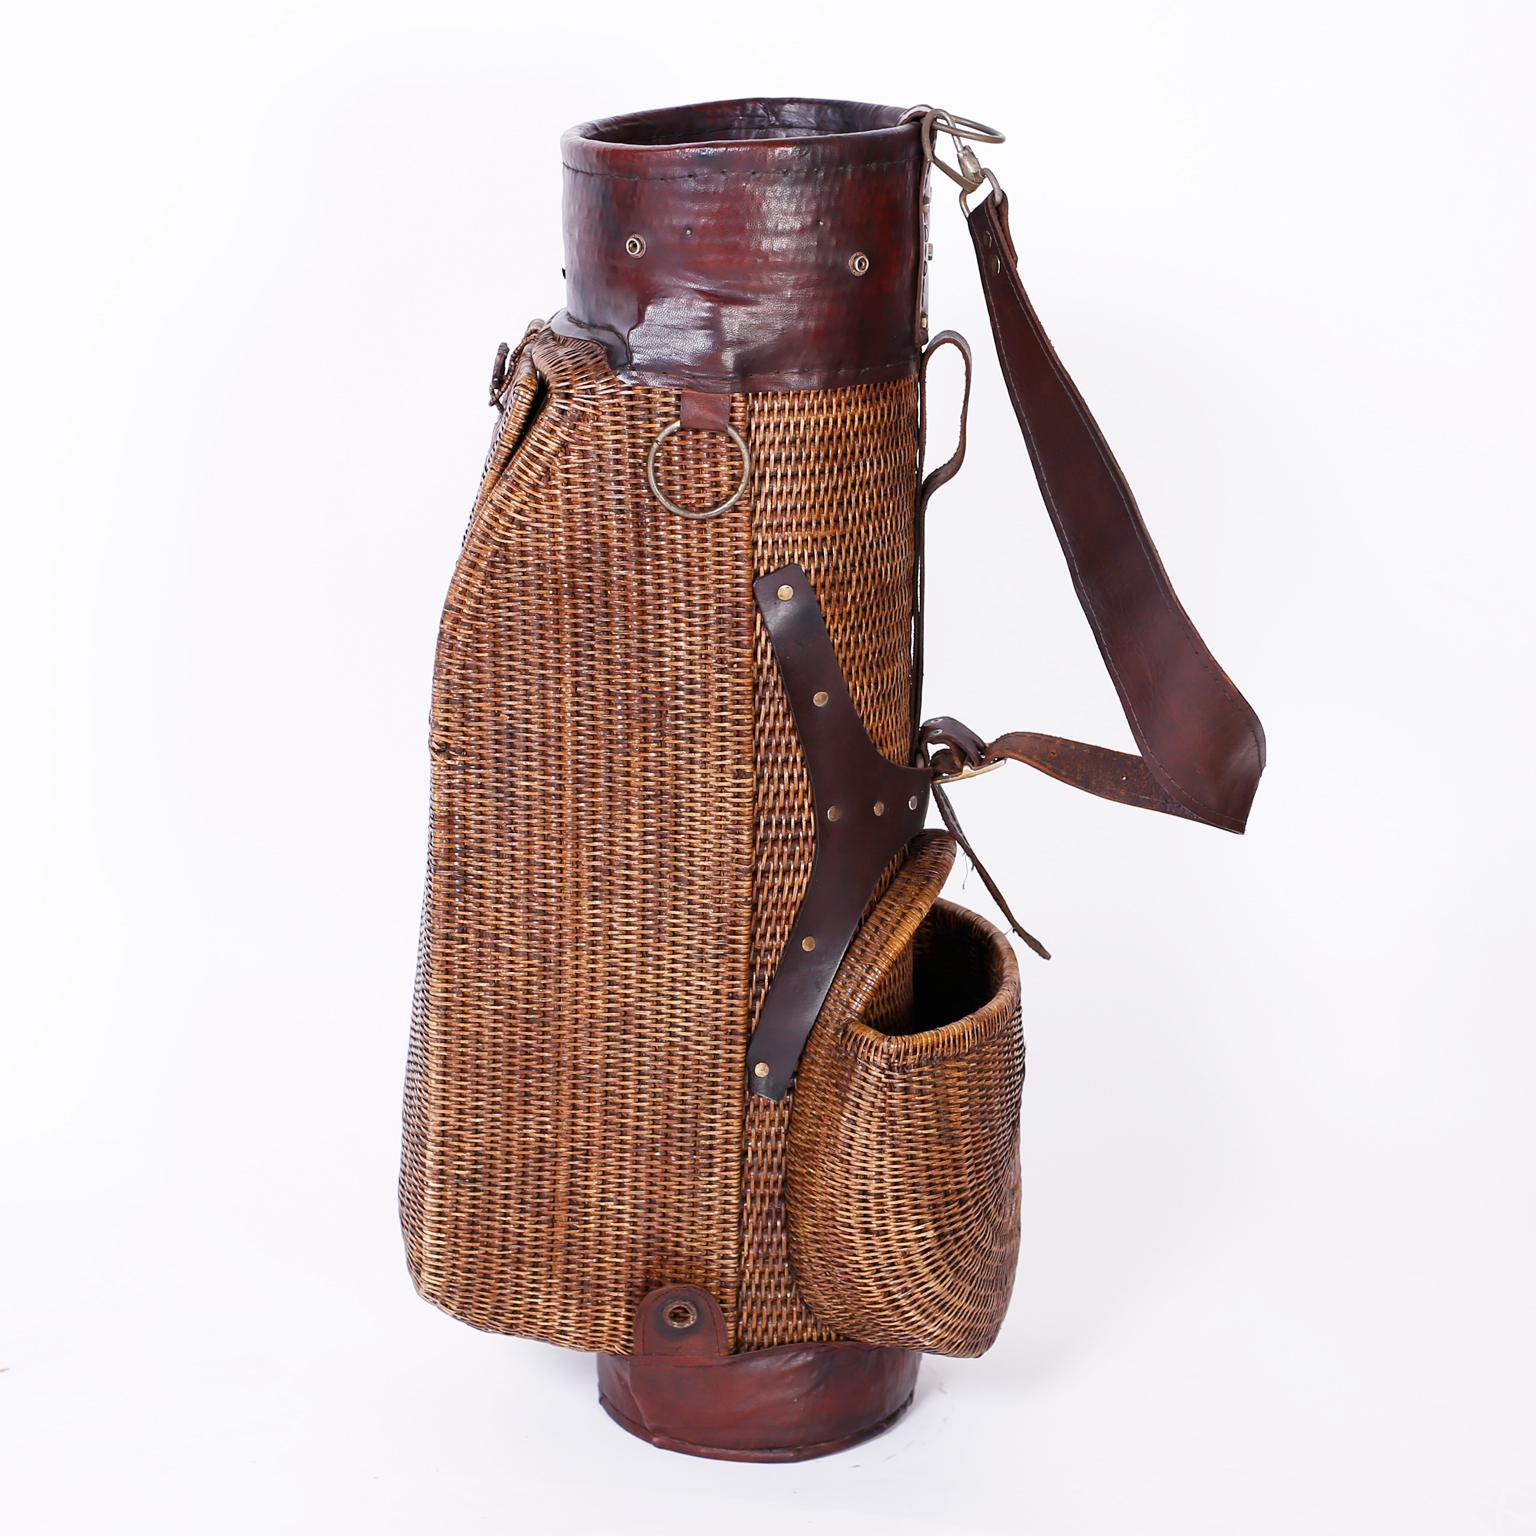 Anglo Indian British colonial style golf bag crafted with wicker over a wood frame with storage compartments and featuring brown leather straps, neck, and foot.